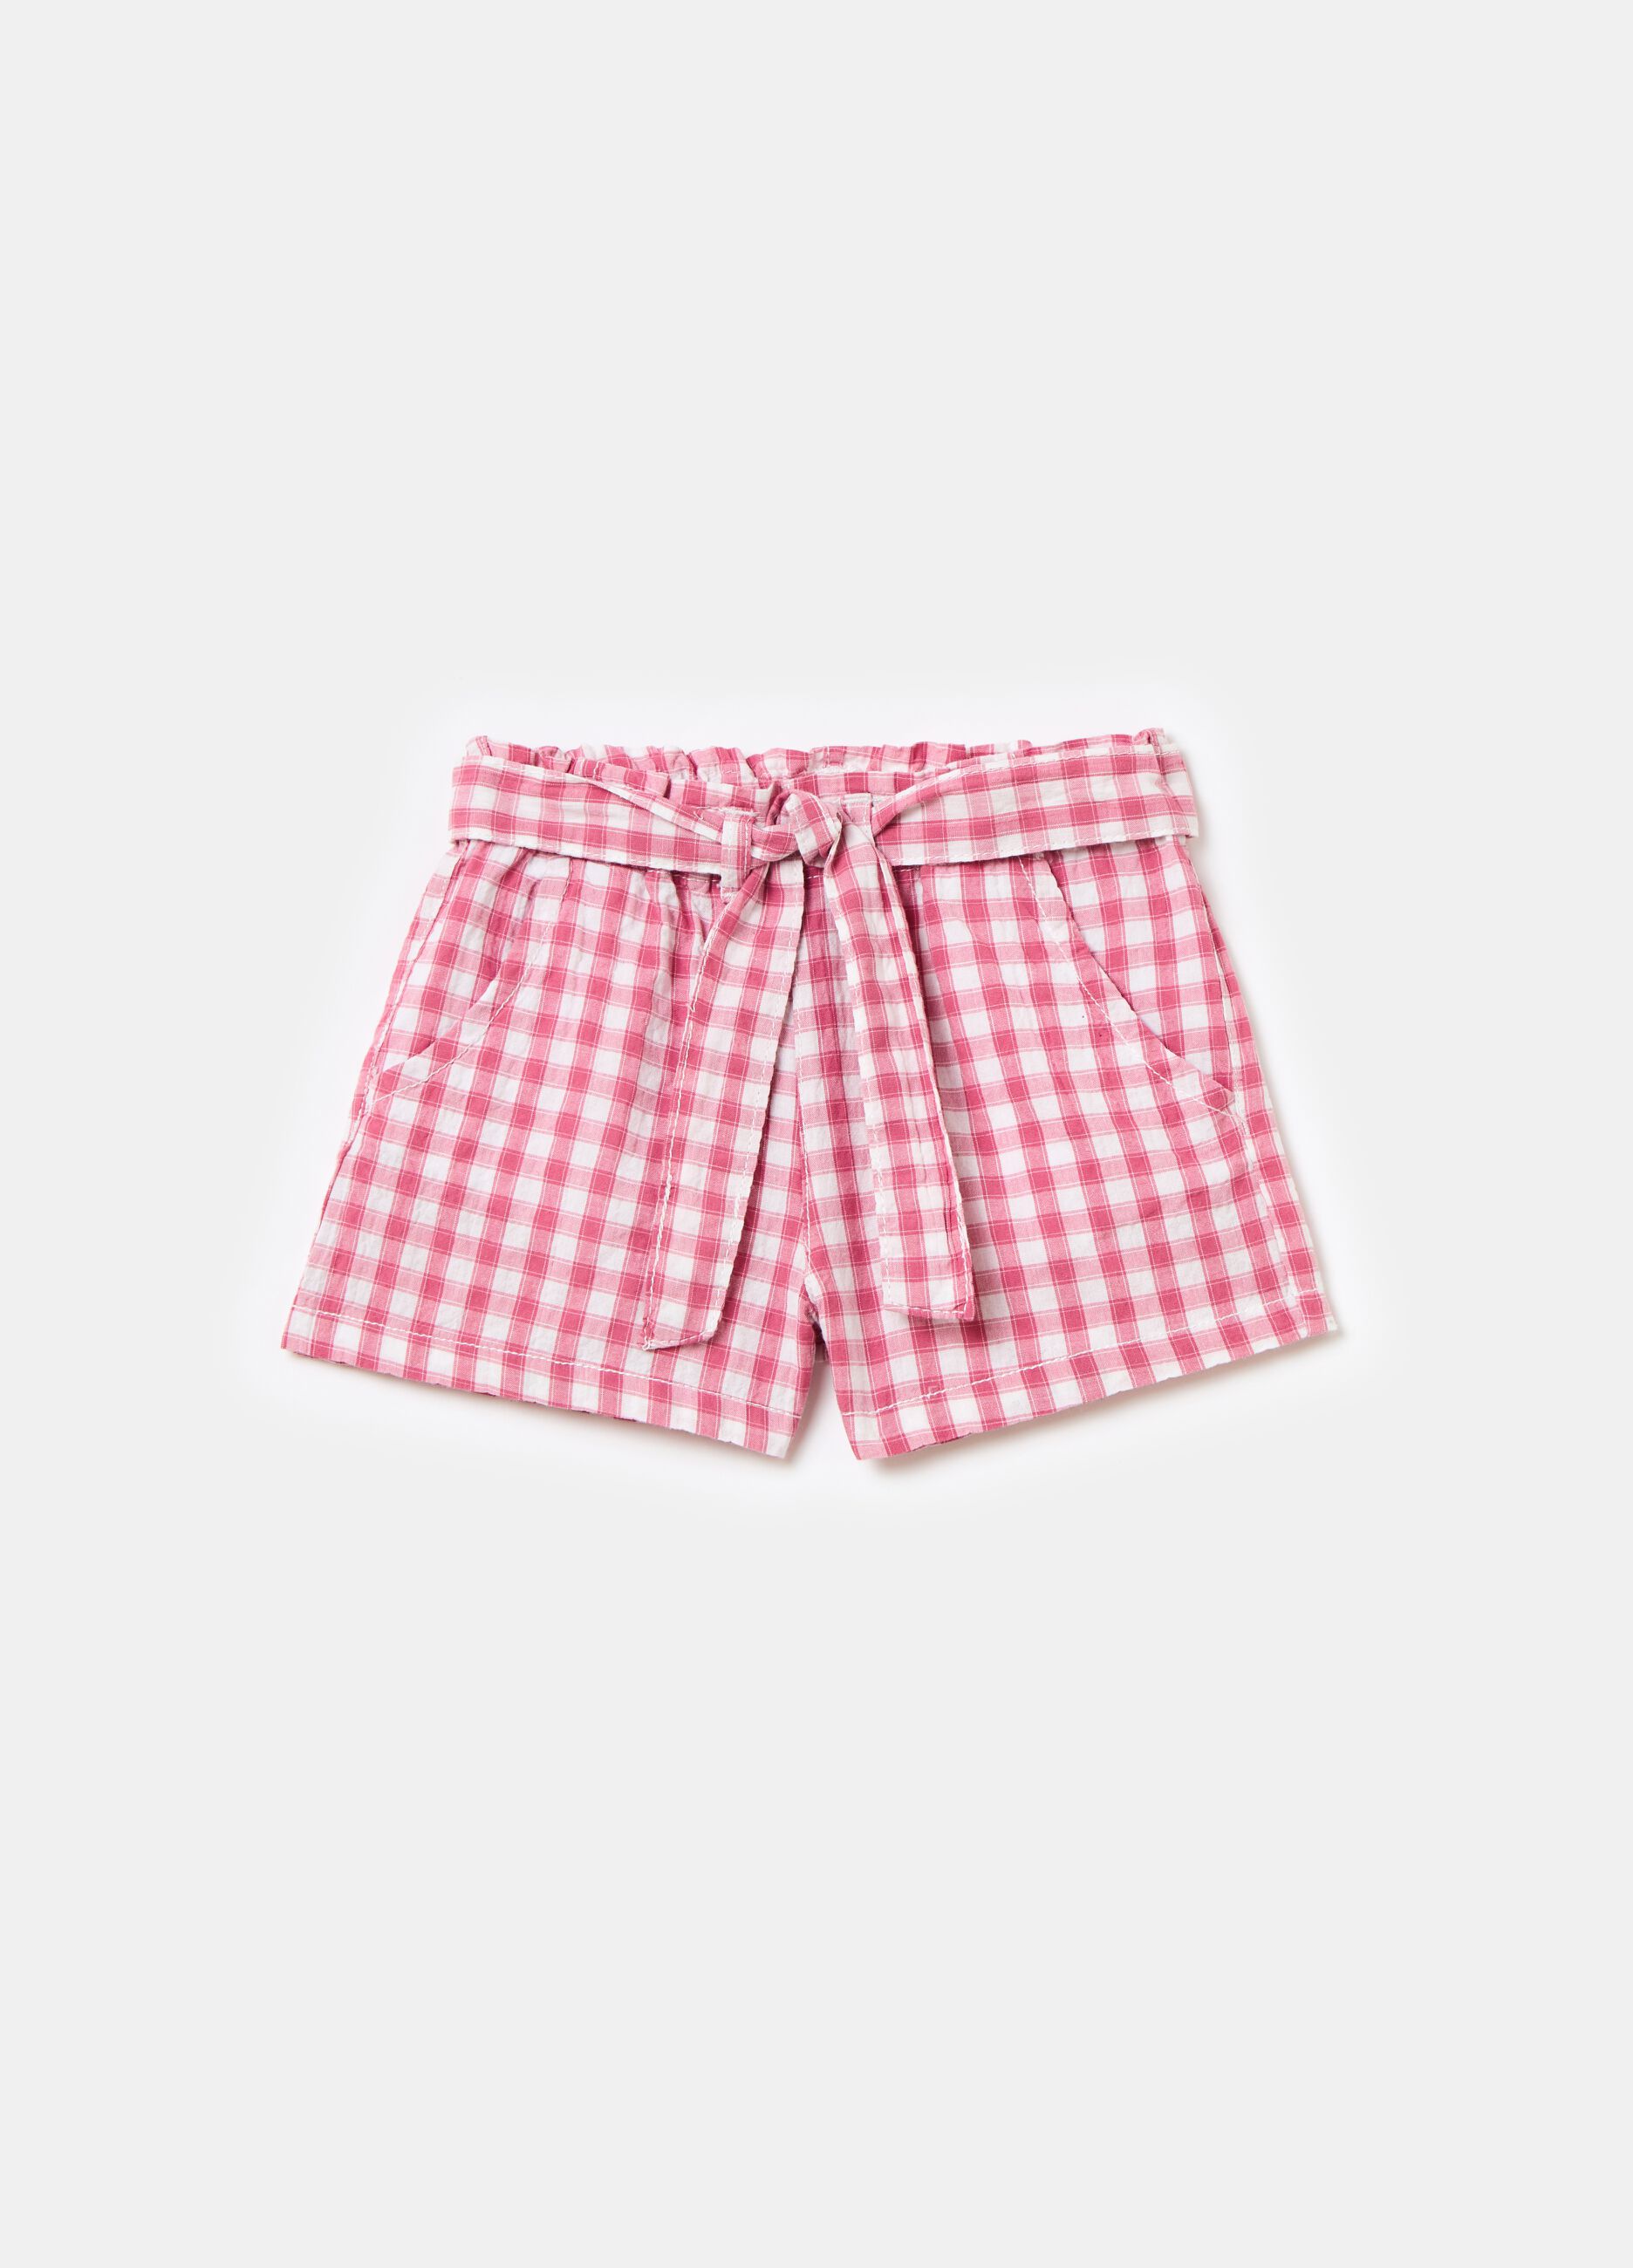 Shorts with gingham pattern